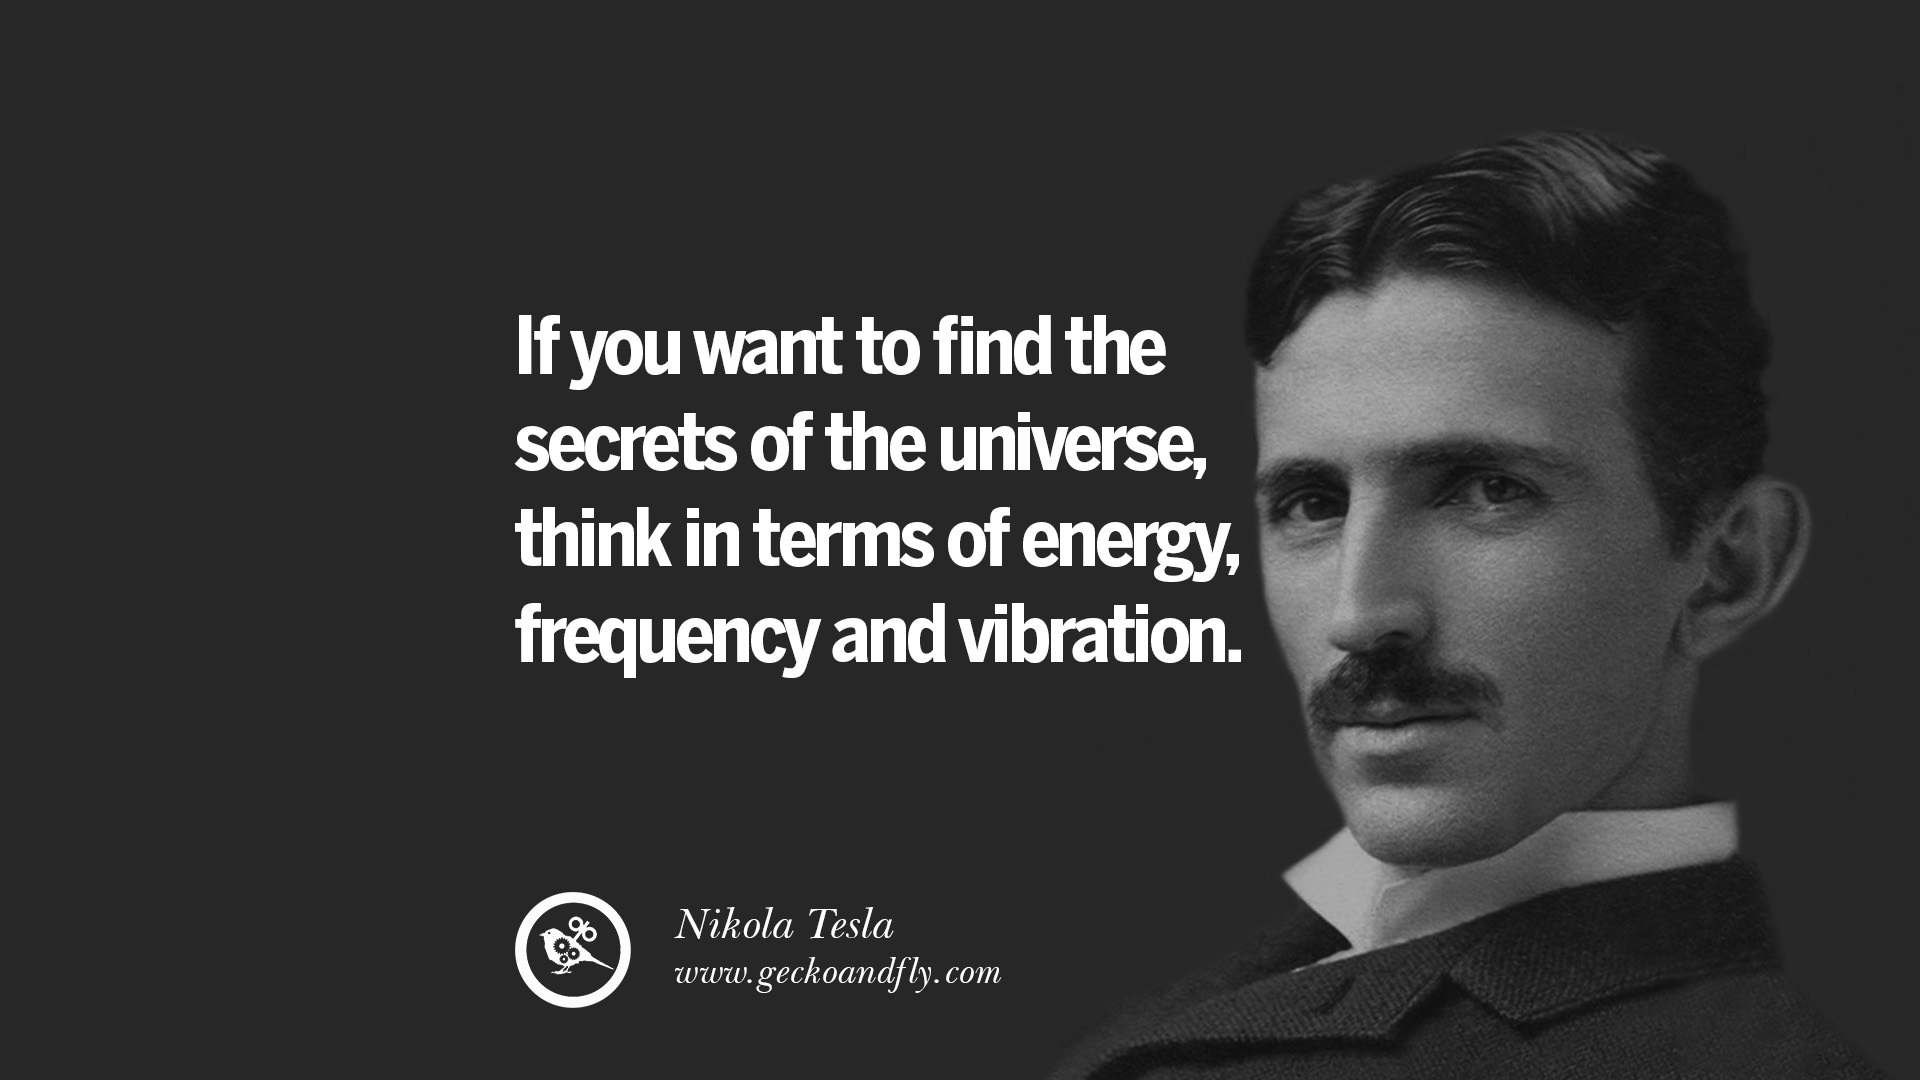 21 Electrifying Nikola Tesla Quotes On Energy, Science And Inventions